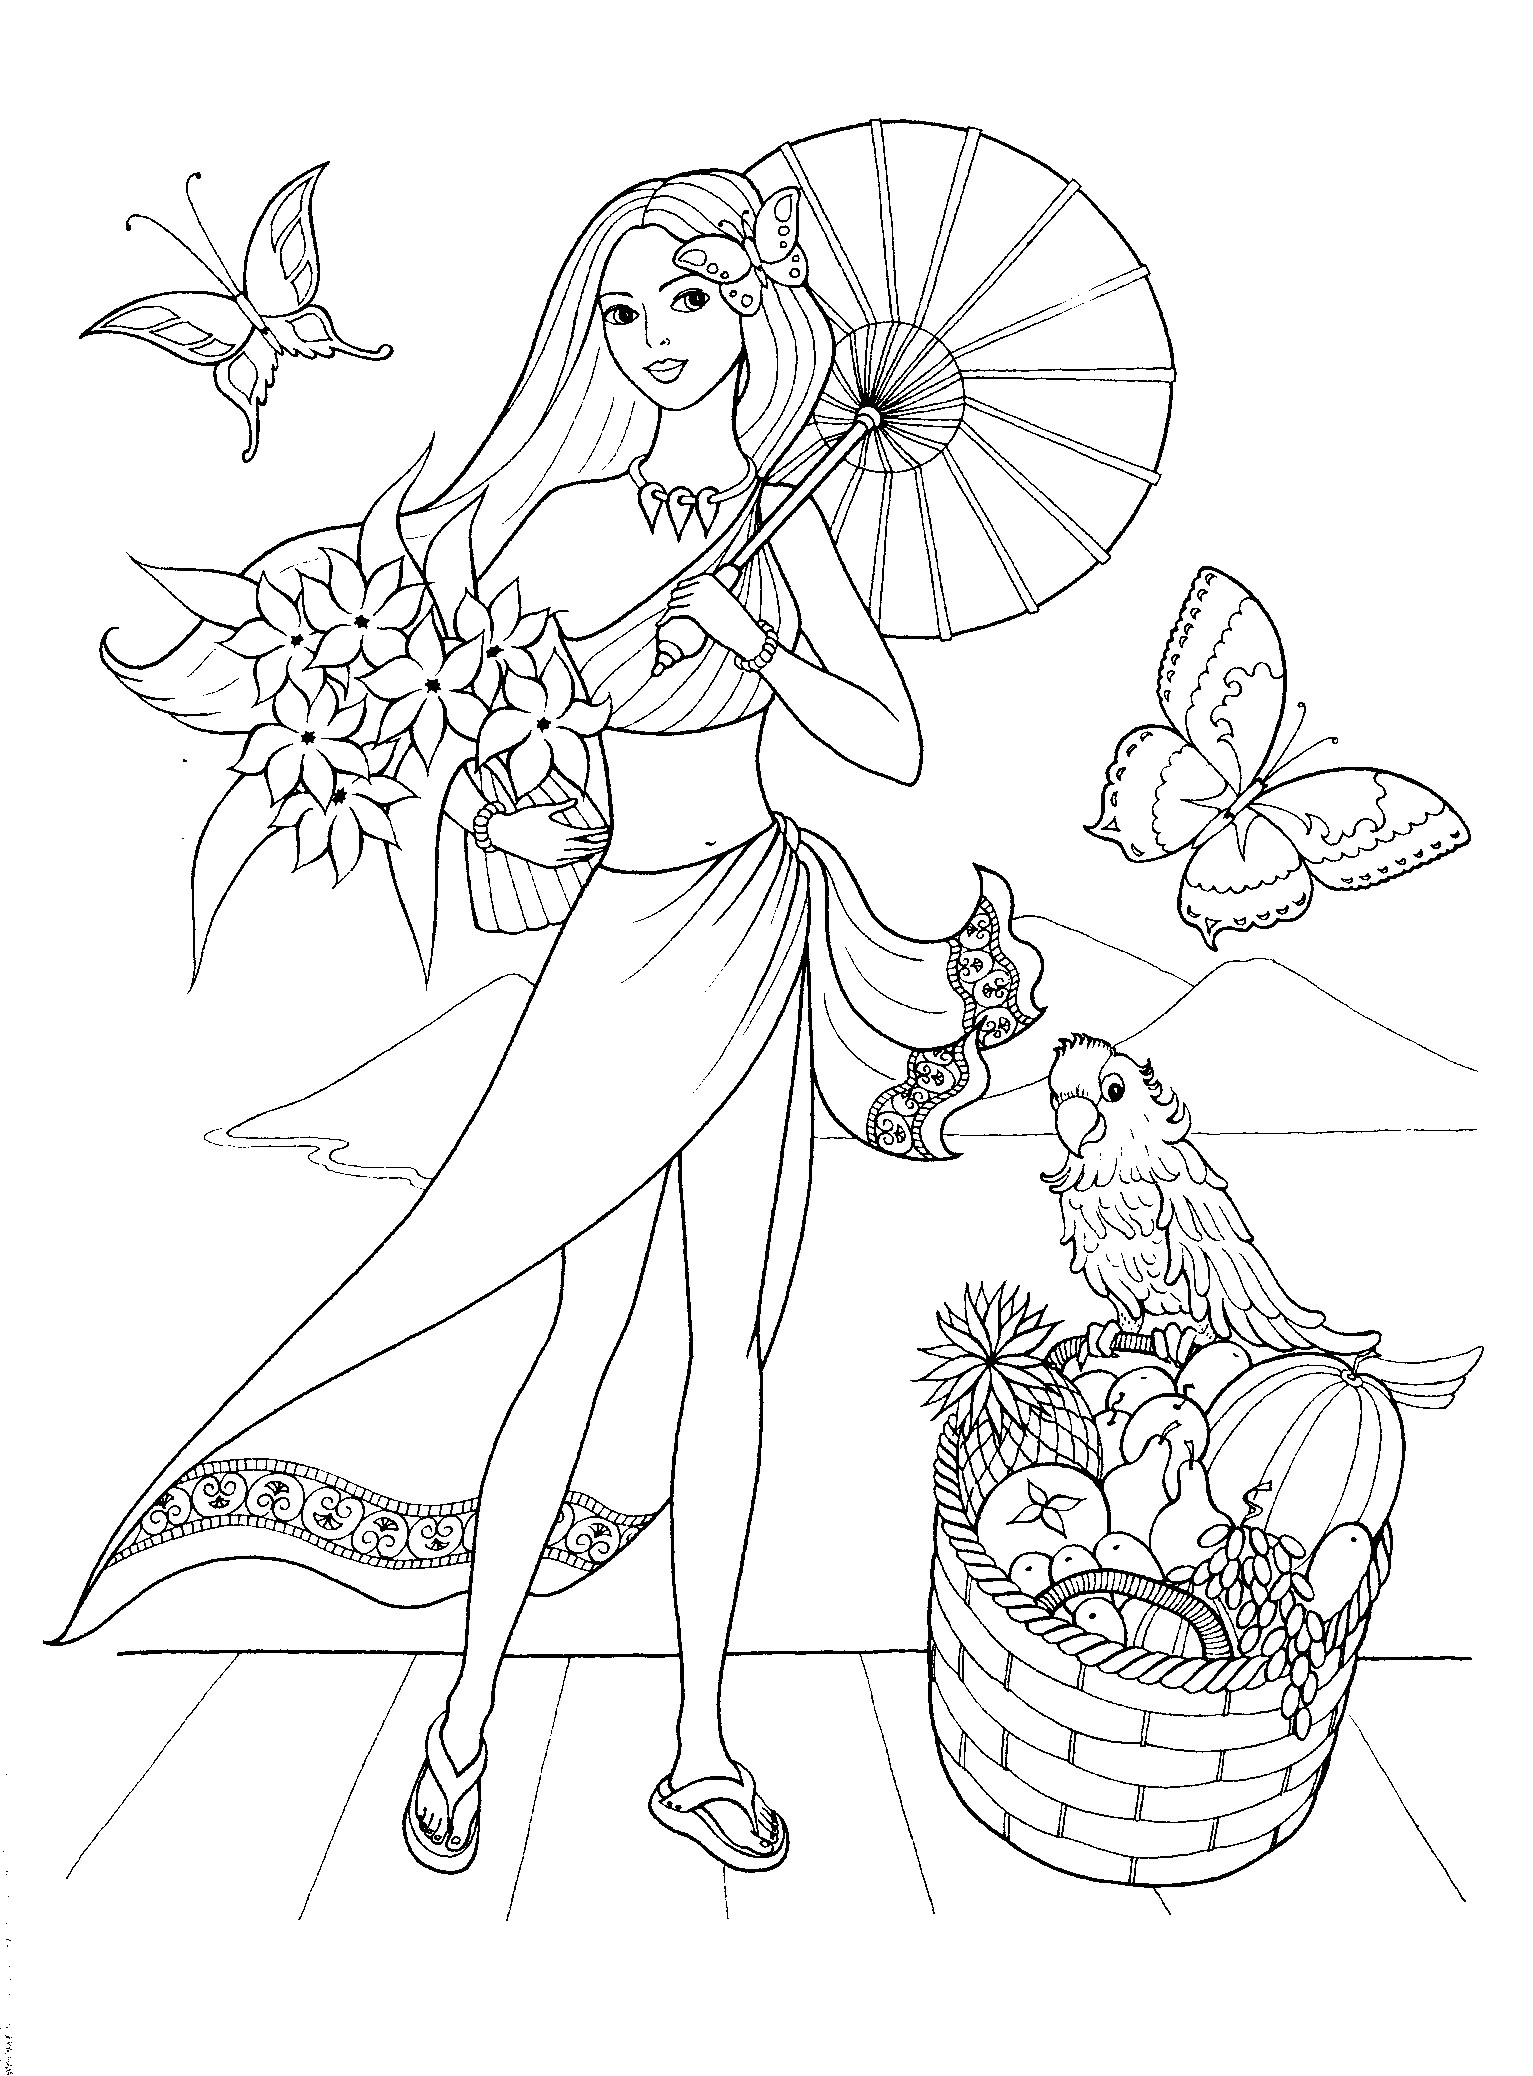 Coloring Sheets For Girls 8 10
 Printable Coloring Pages For Girls 10 And Up Coloring Home